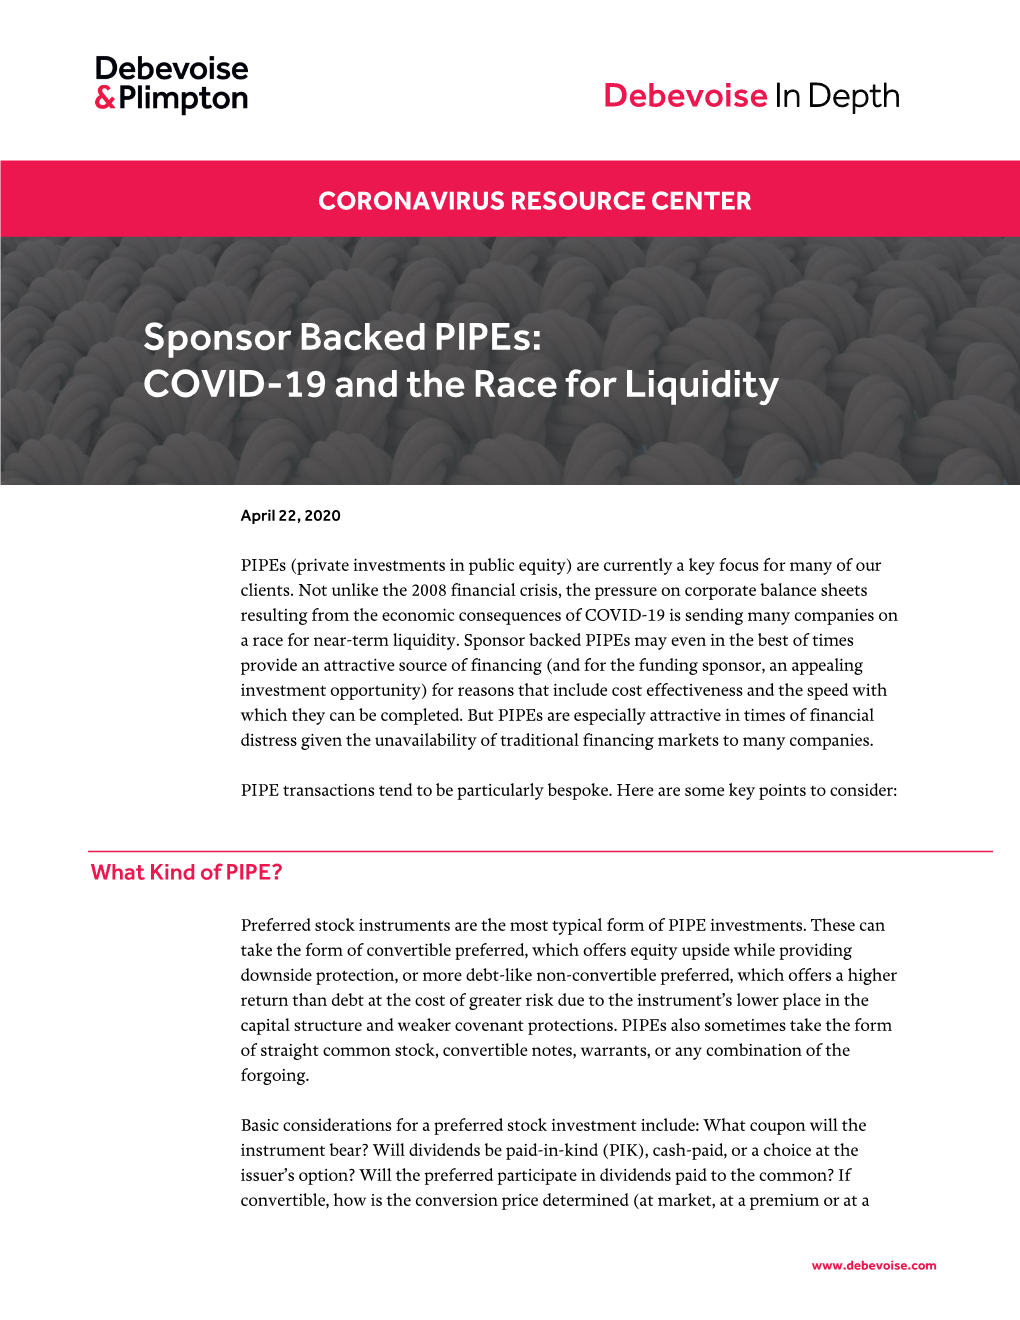 Sponsor Backed Pipes: COVID-19 and the Race for Liquidity